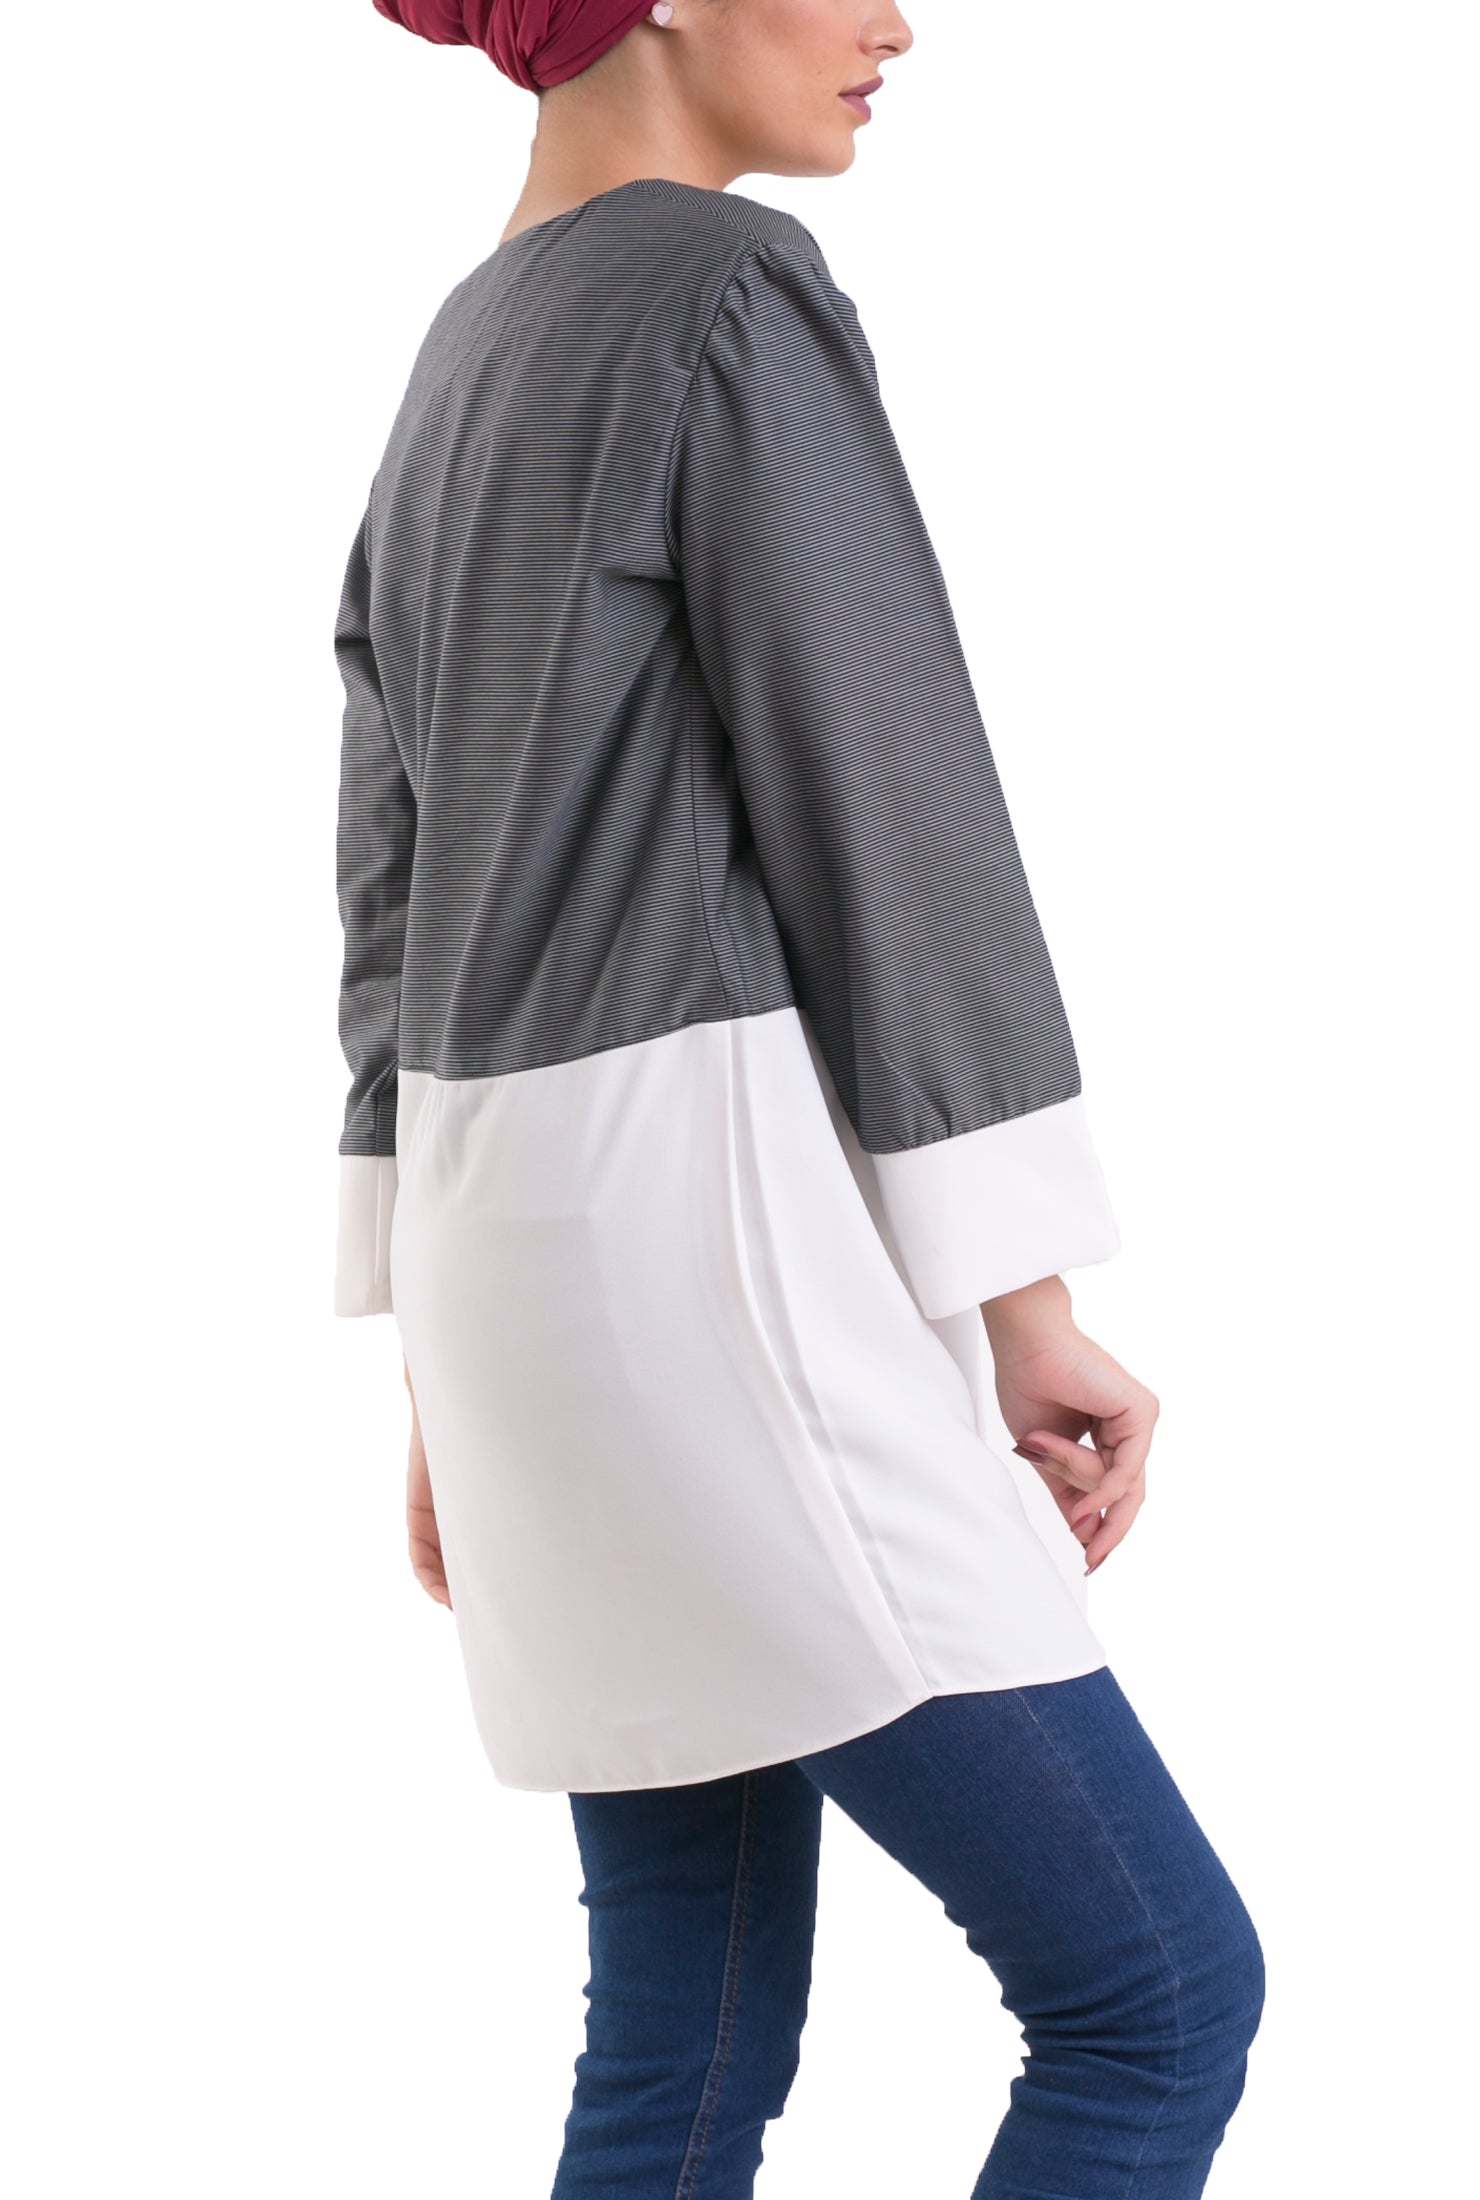 Buttonless Chemise -Long Sleeves- White & Grey